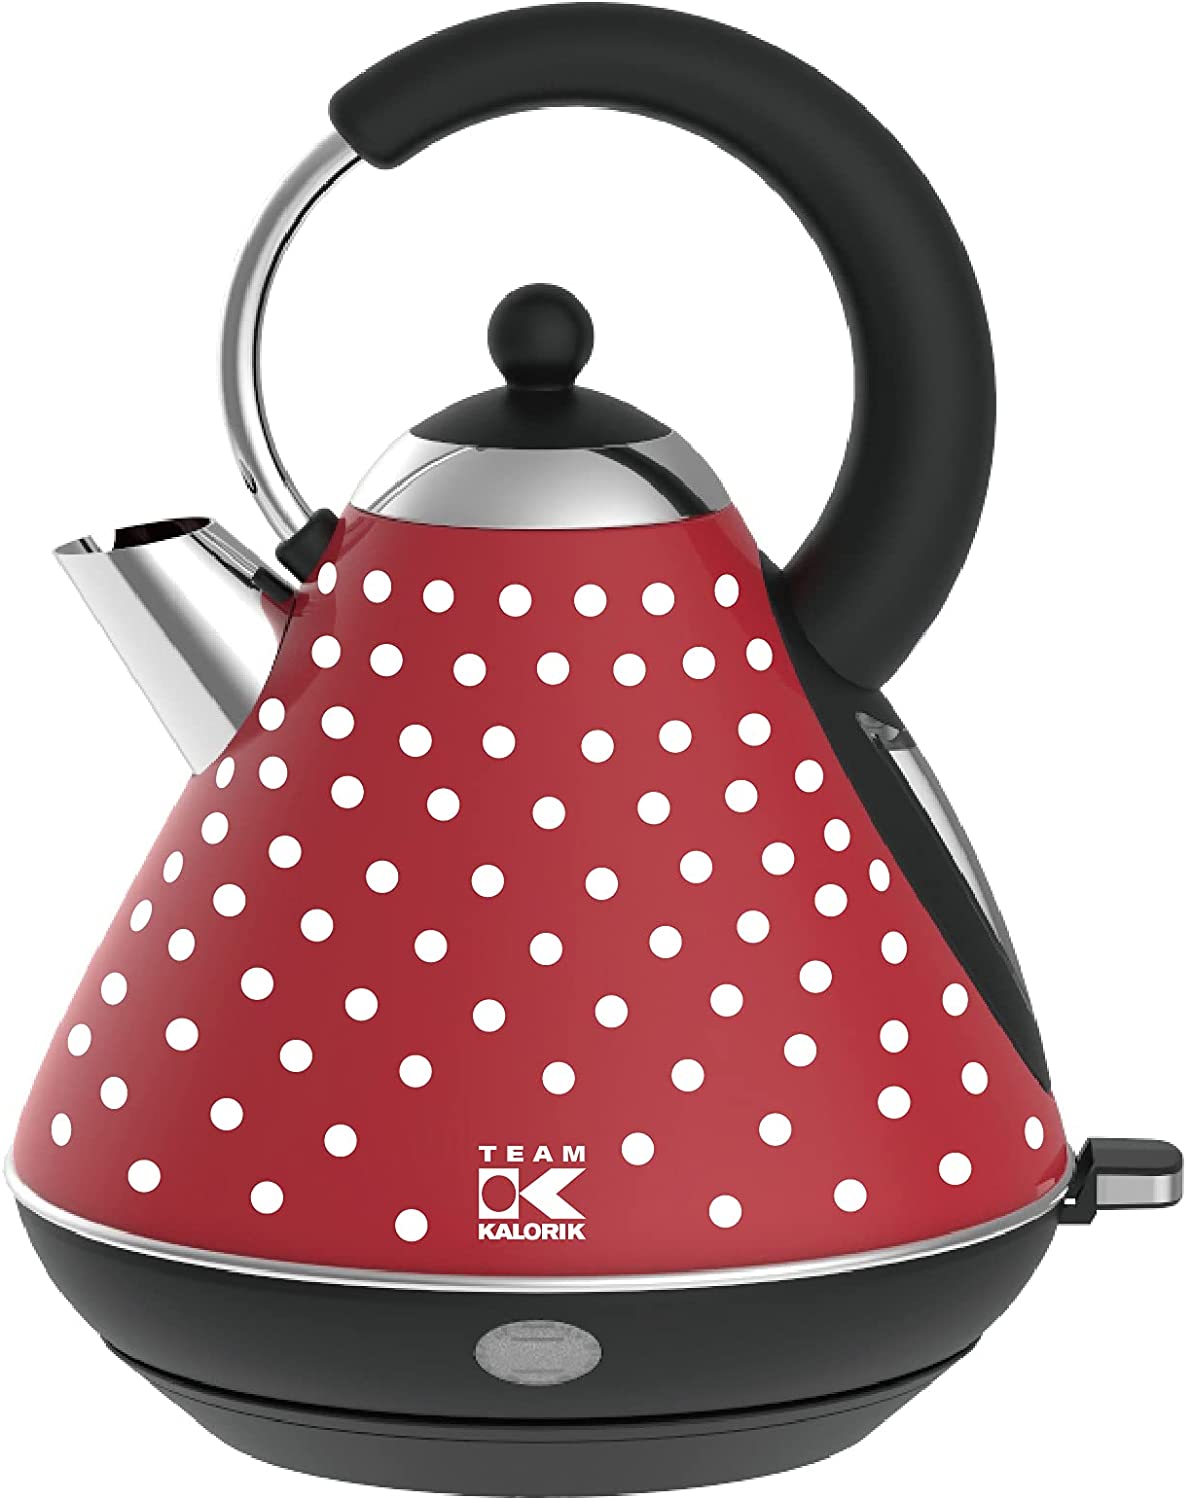 Kalorik Team Calorik Retro Stainless Steel Kettle with 1.7 Litre Capacity, 2400 W, Particulate Filter, Red/White, TKG JK 1045 RWD